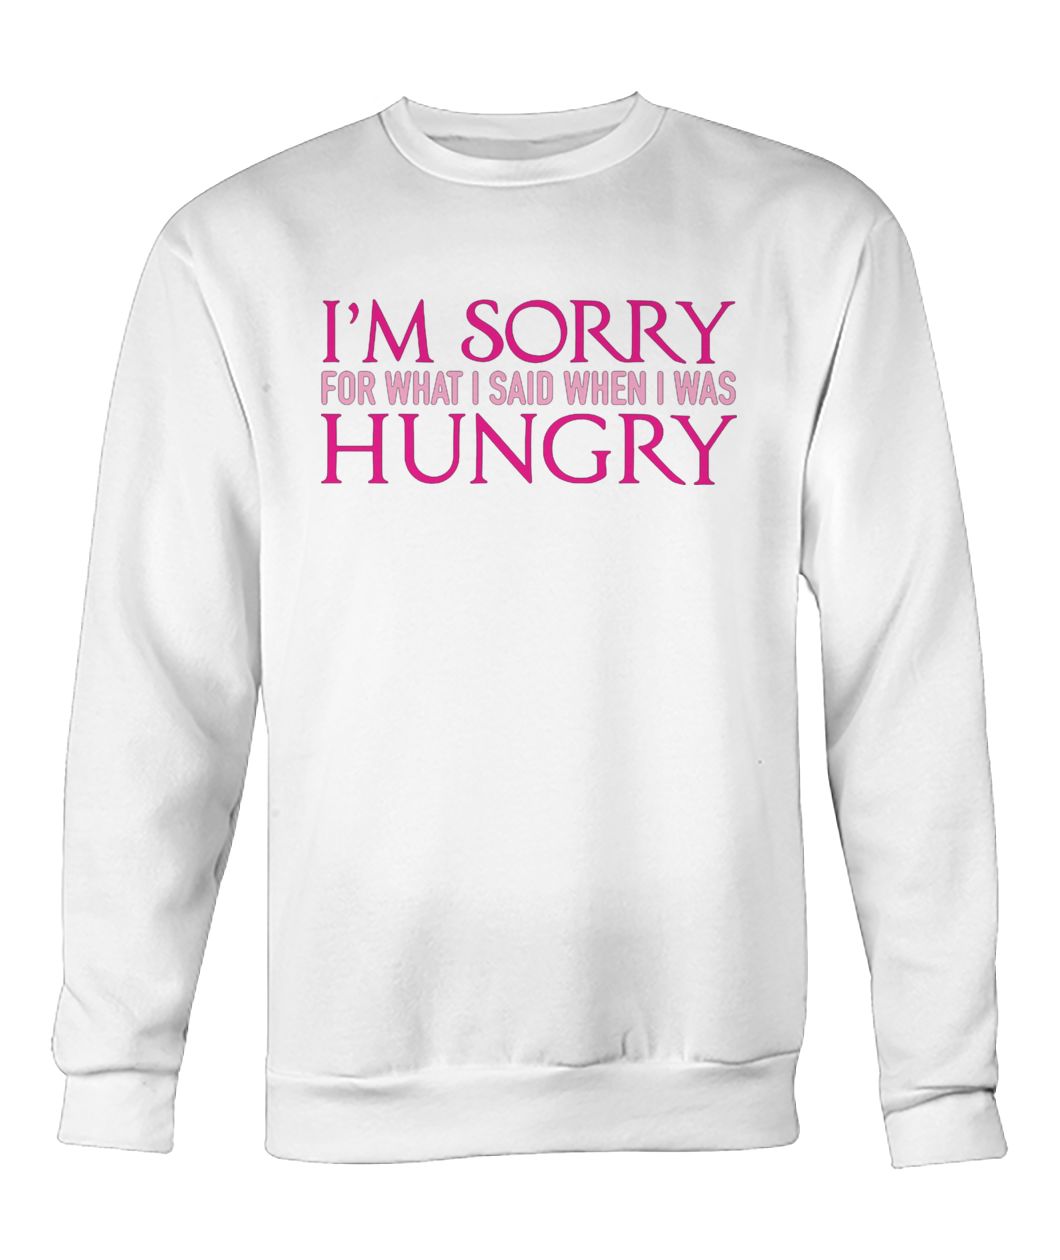 I'm sorry for what I said when I was hungry crew neck sweatshirt